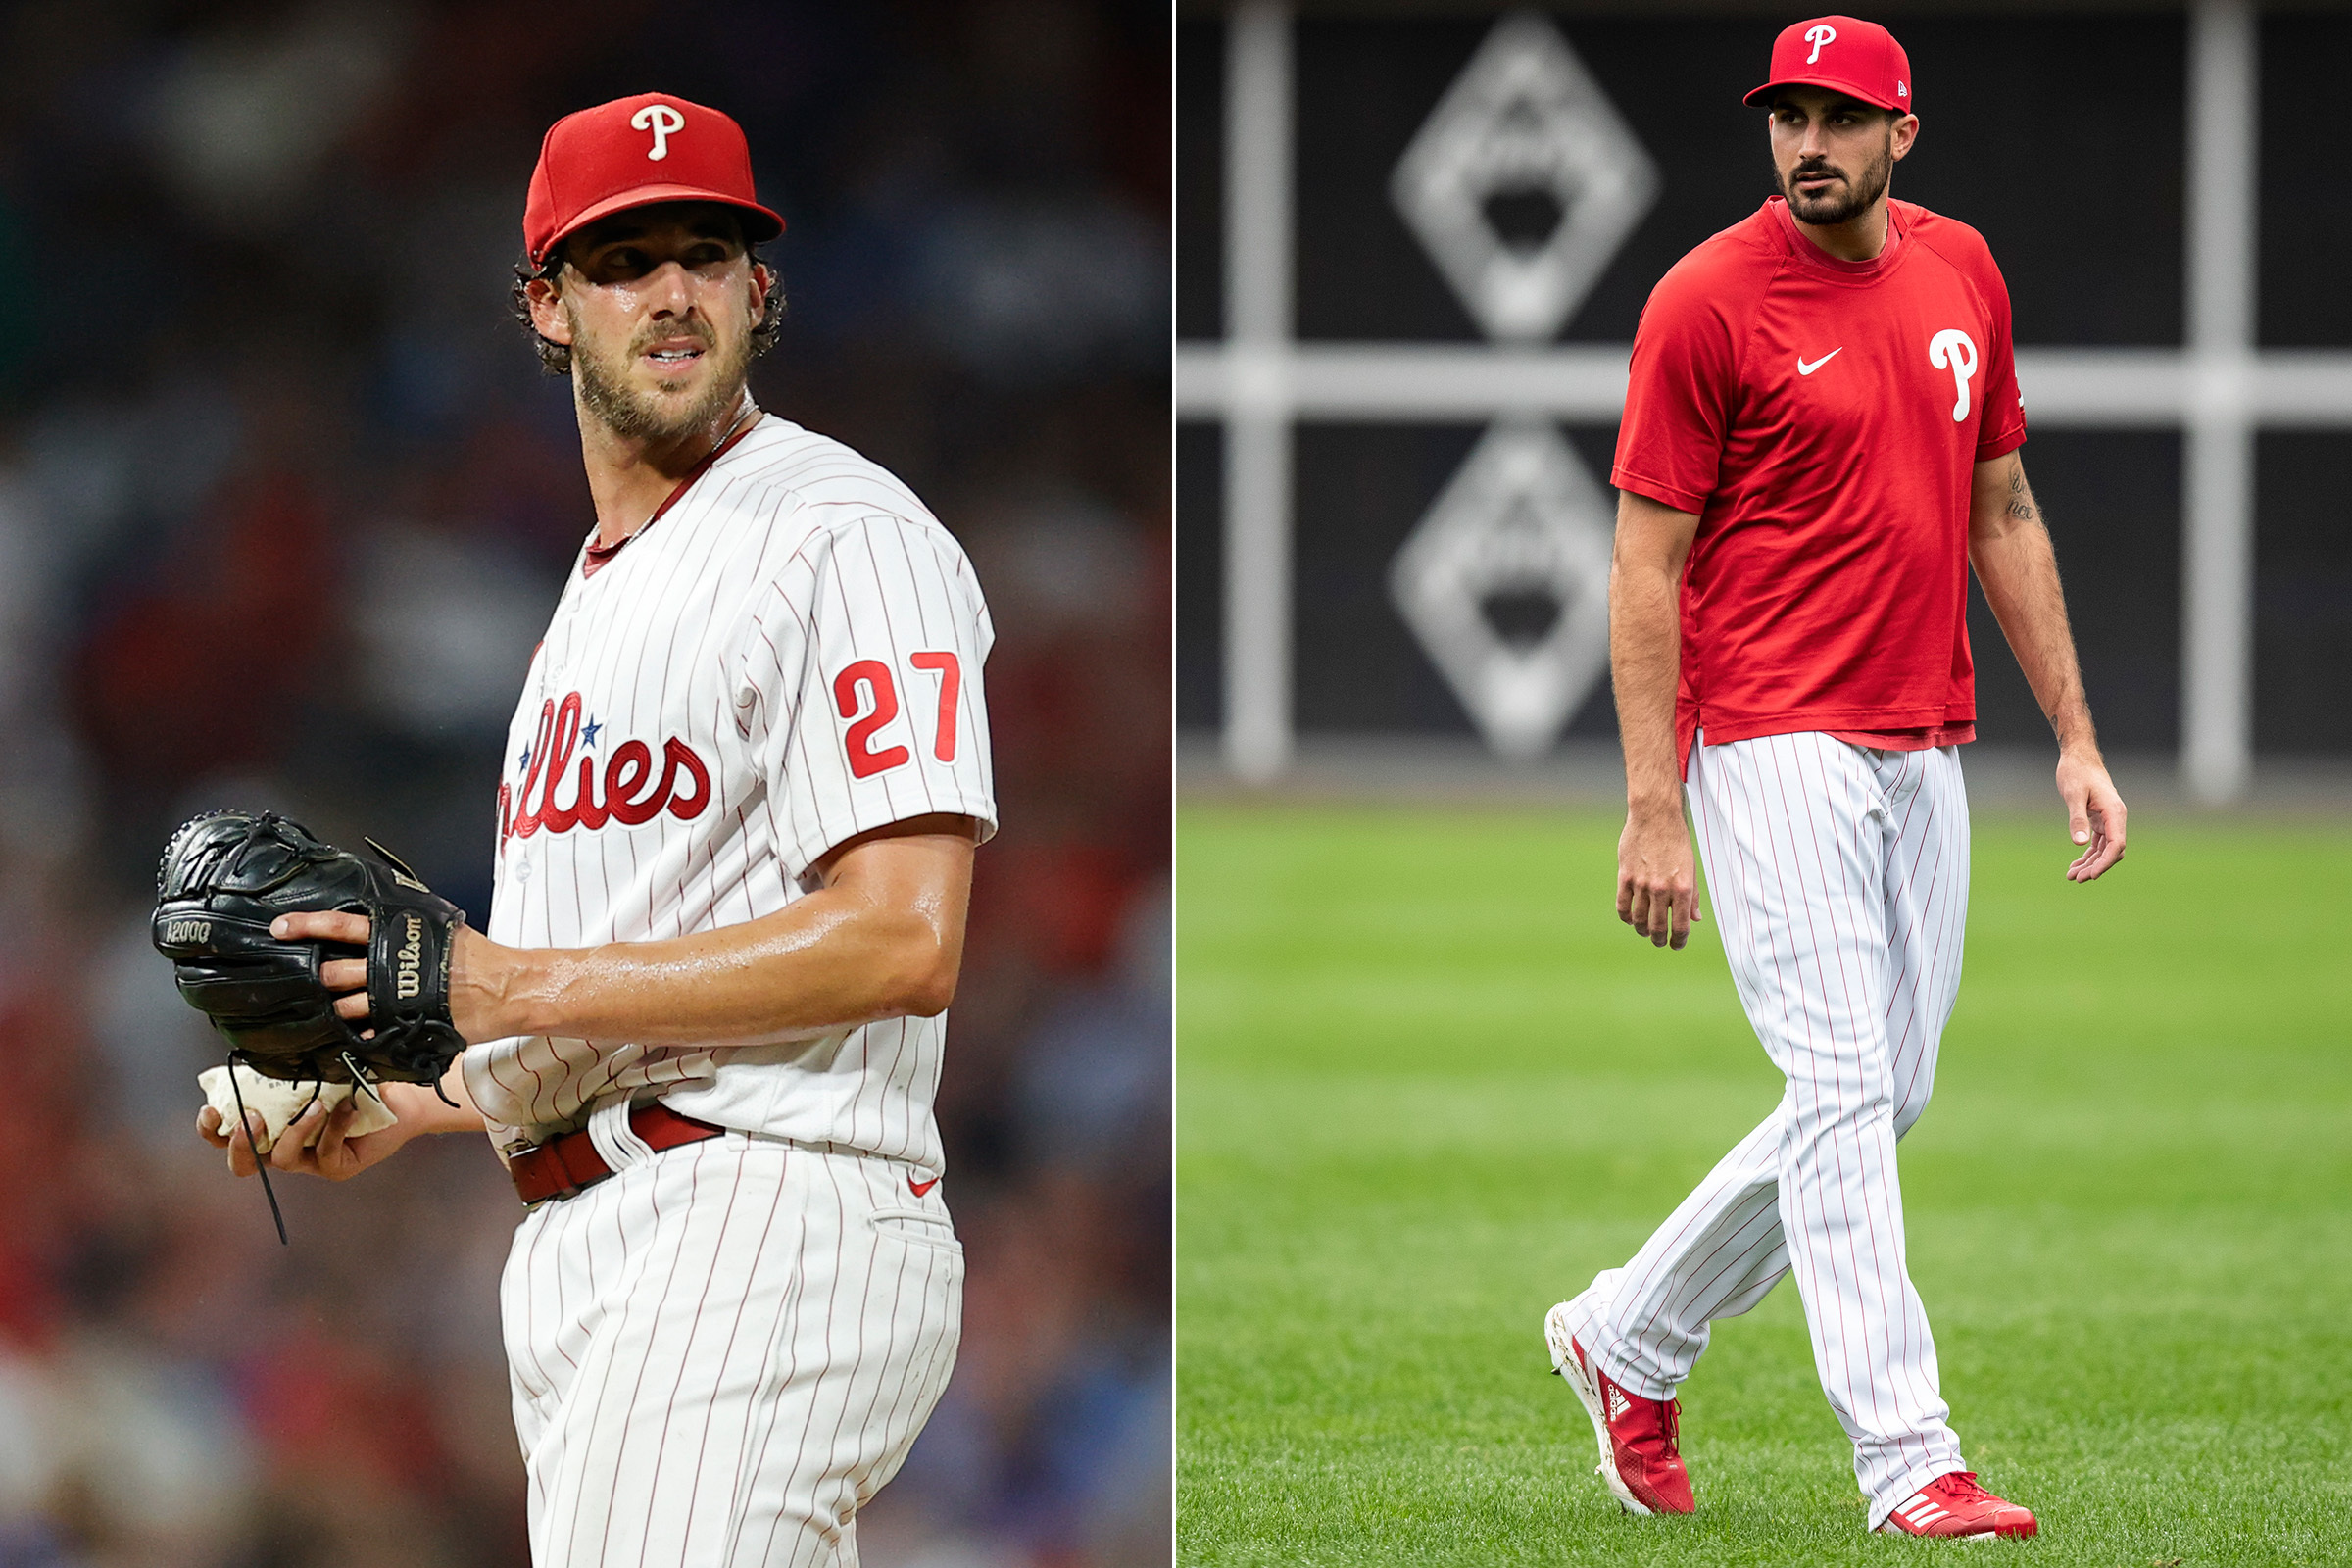 Best friends Aaron Nola and Zach Eflin square off in Phillies vs. Rays, and  savor it - The Athletic